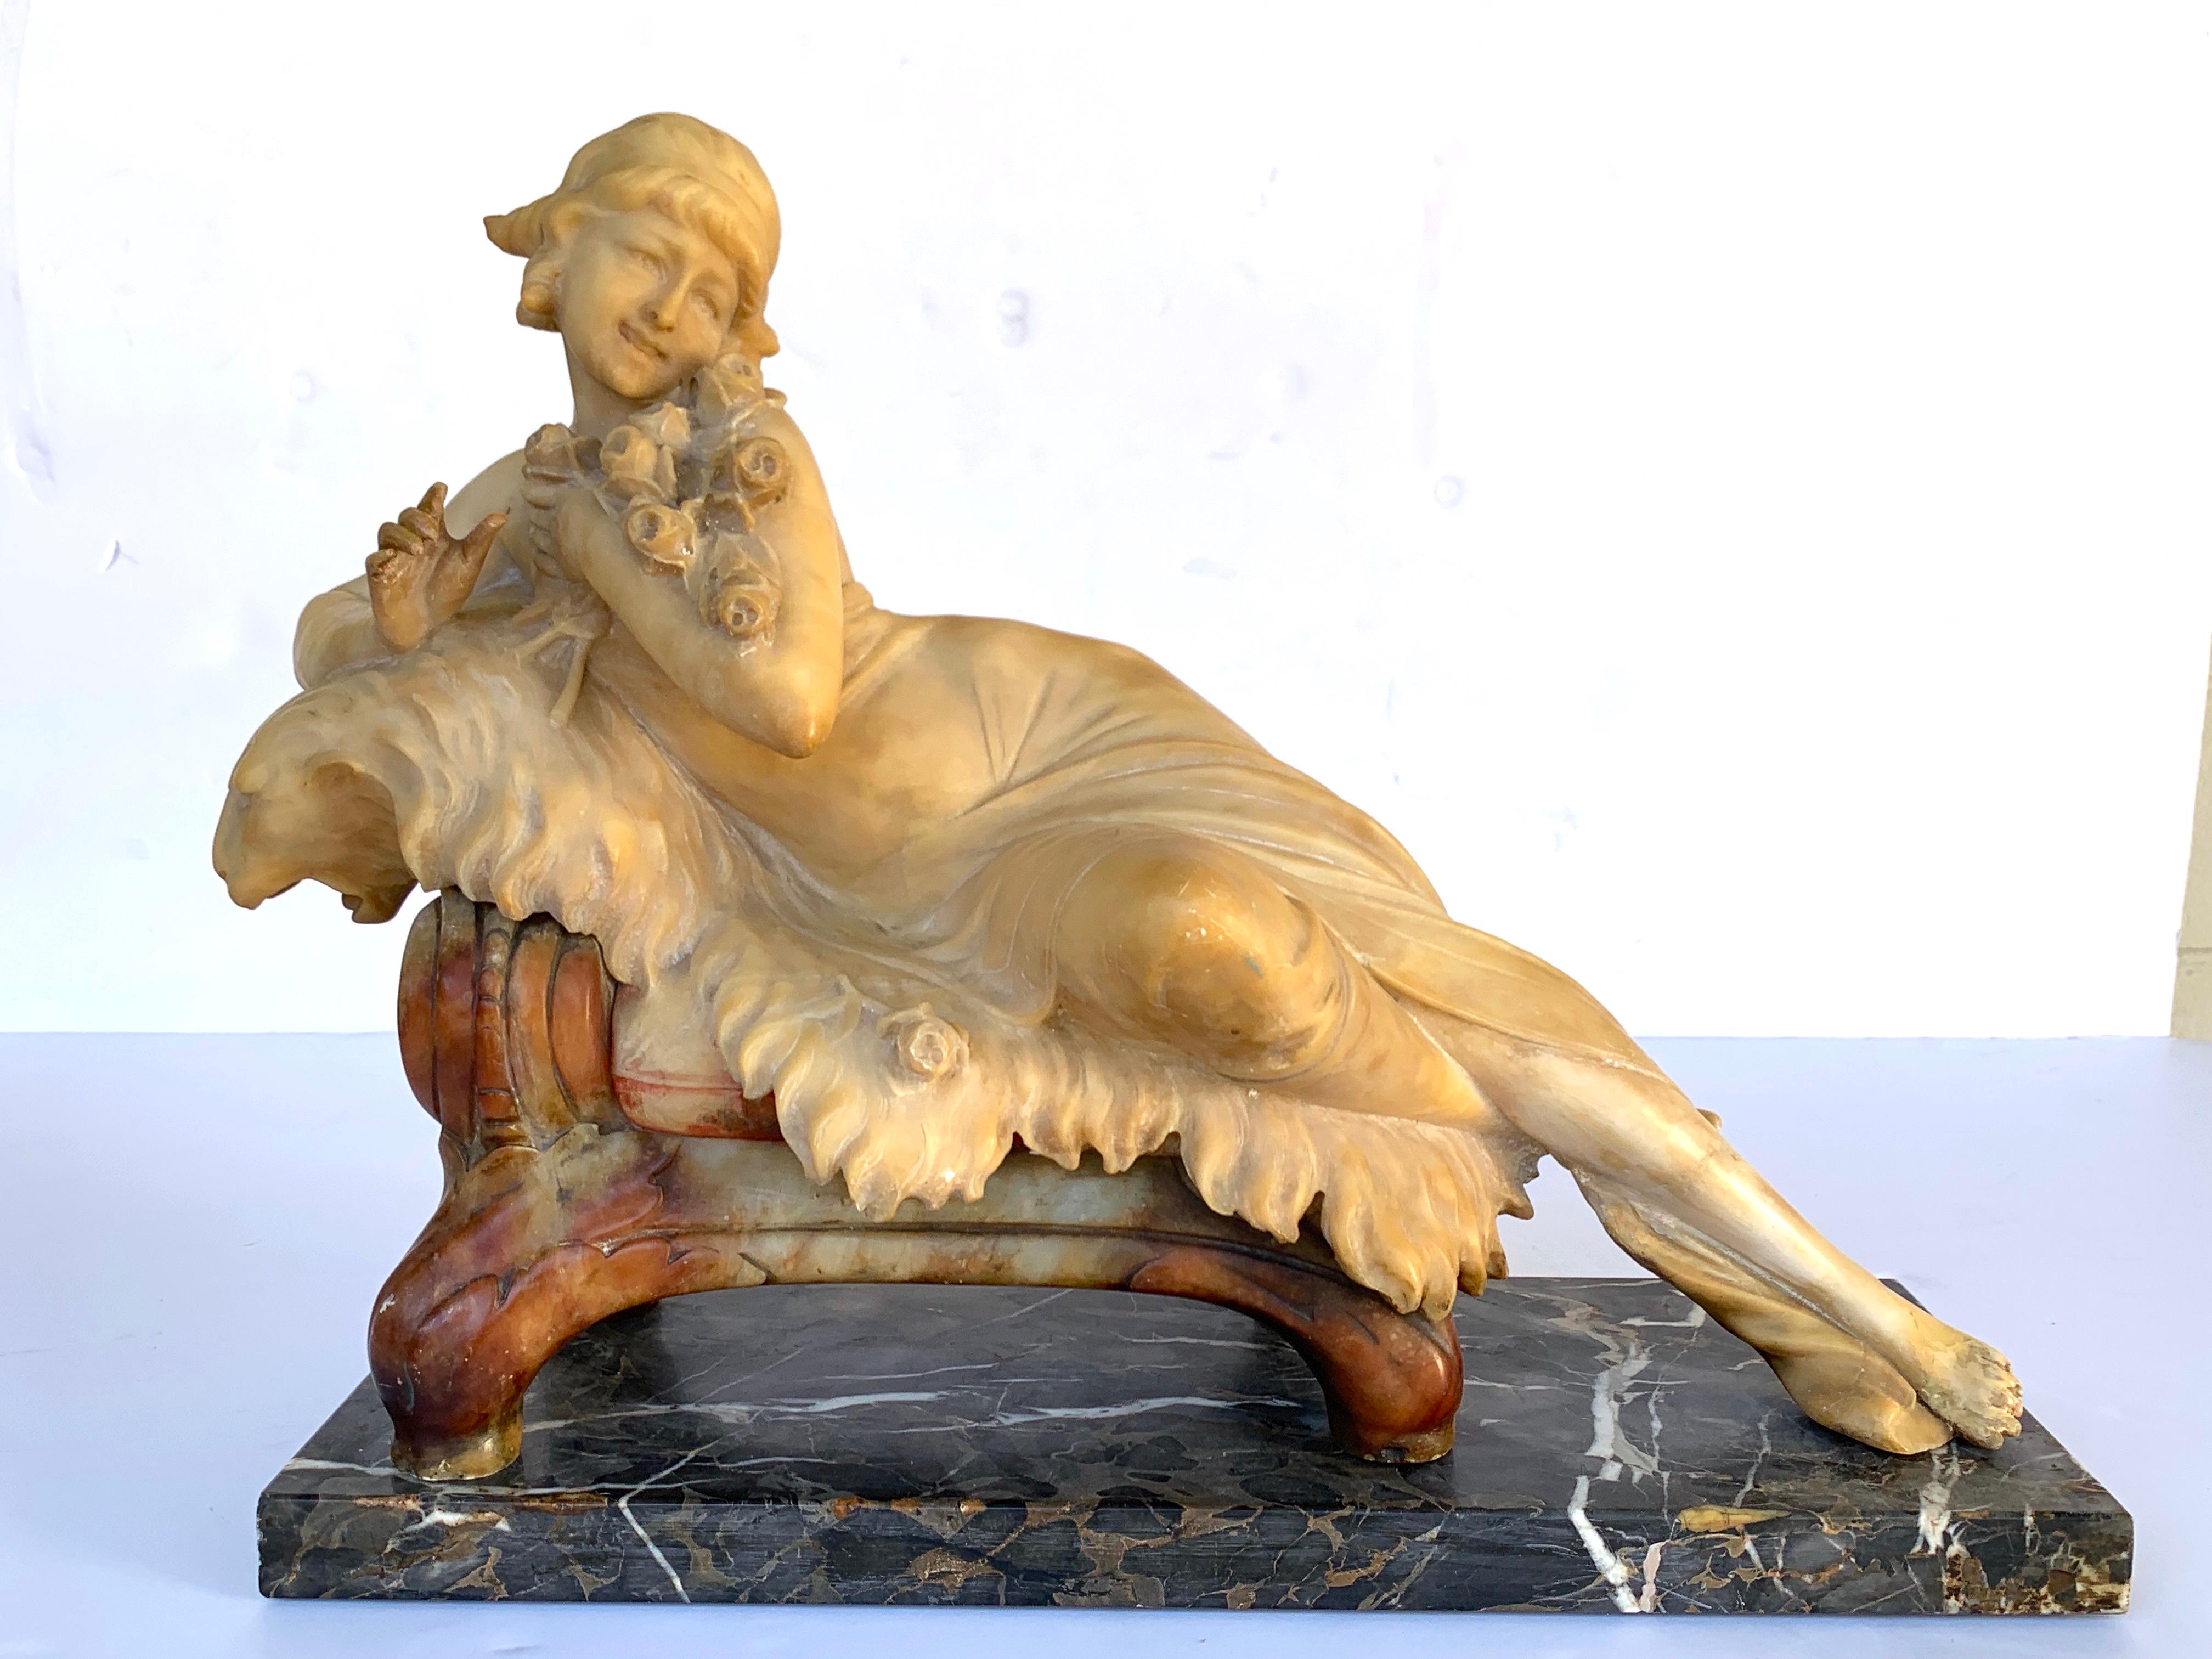 Italian alabaster and marble reclining muse on a lion bench sculpture, in two parts, beautifully carved multi colored stone, artist signature of C Berlincioni, Florence Italy on the base in script
The sculpture measures 20